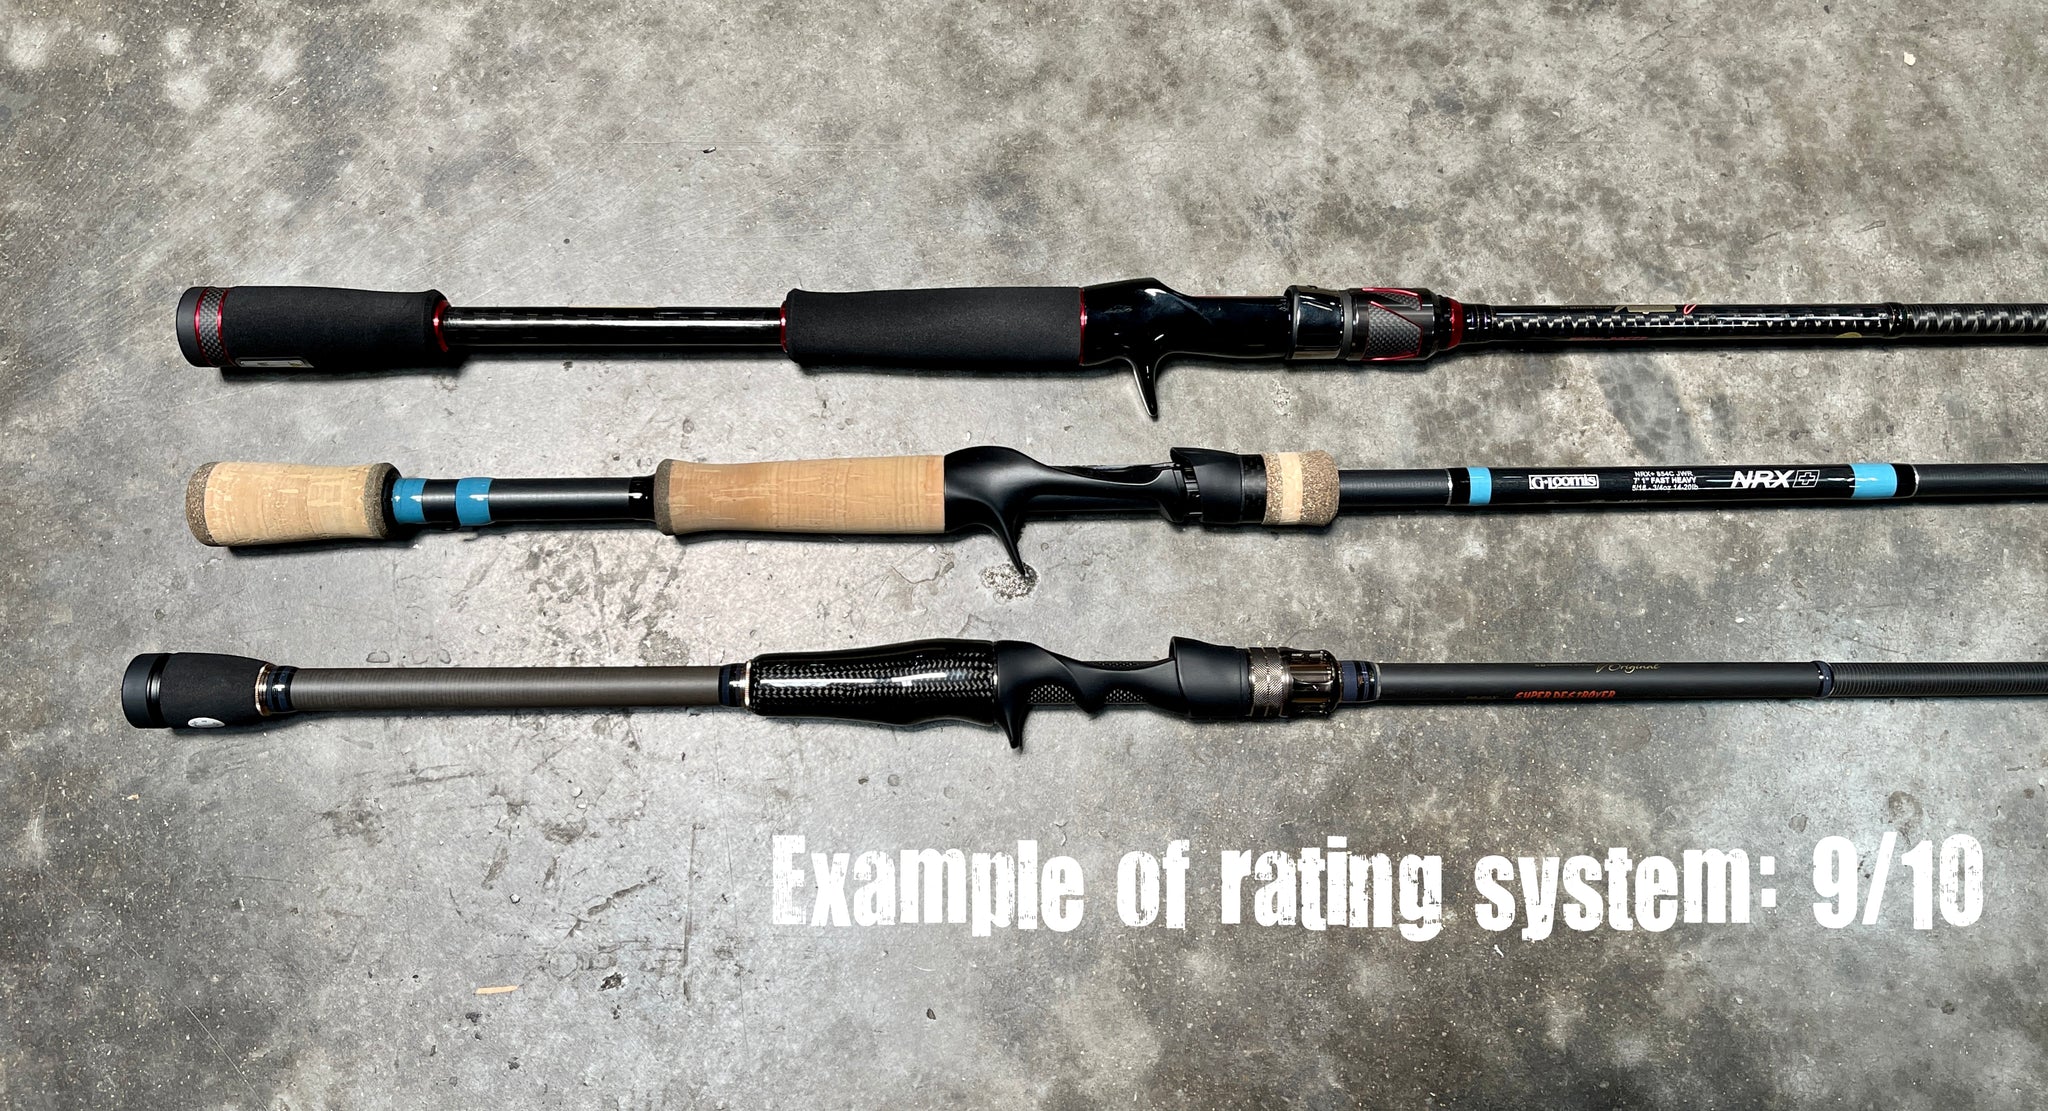 daiwa rods, daiwa rods Suppliers and Manufacturers at